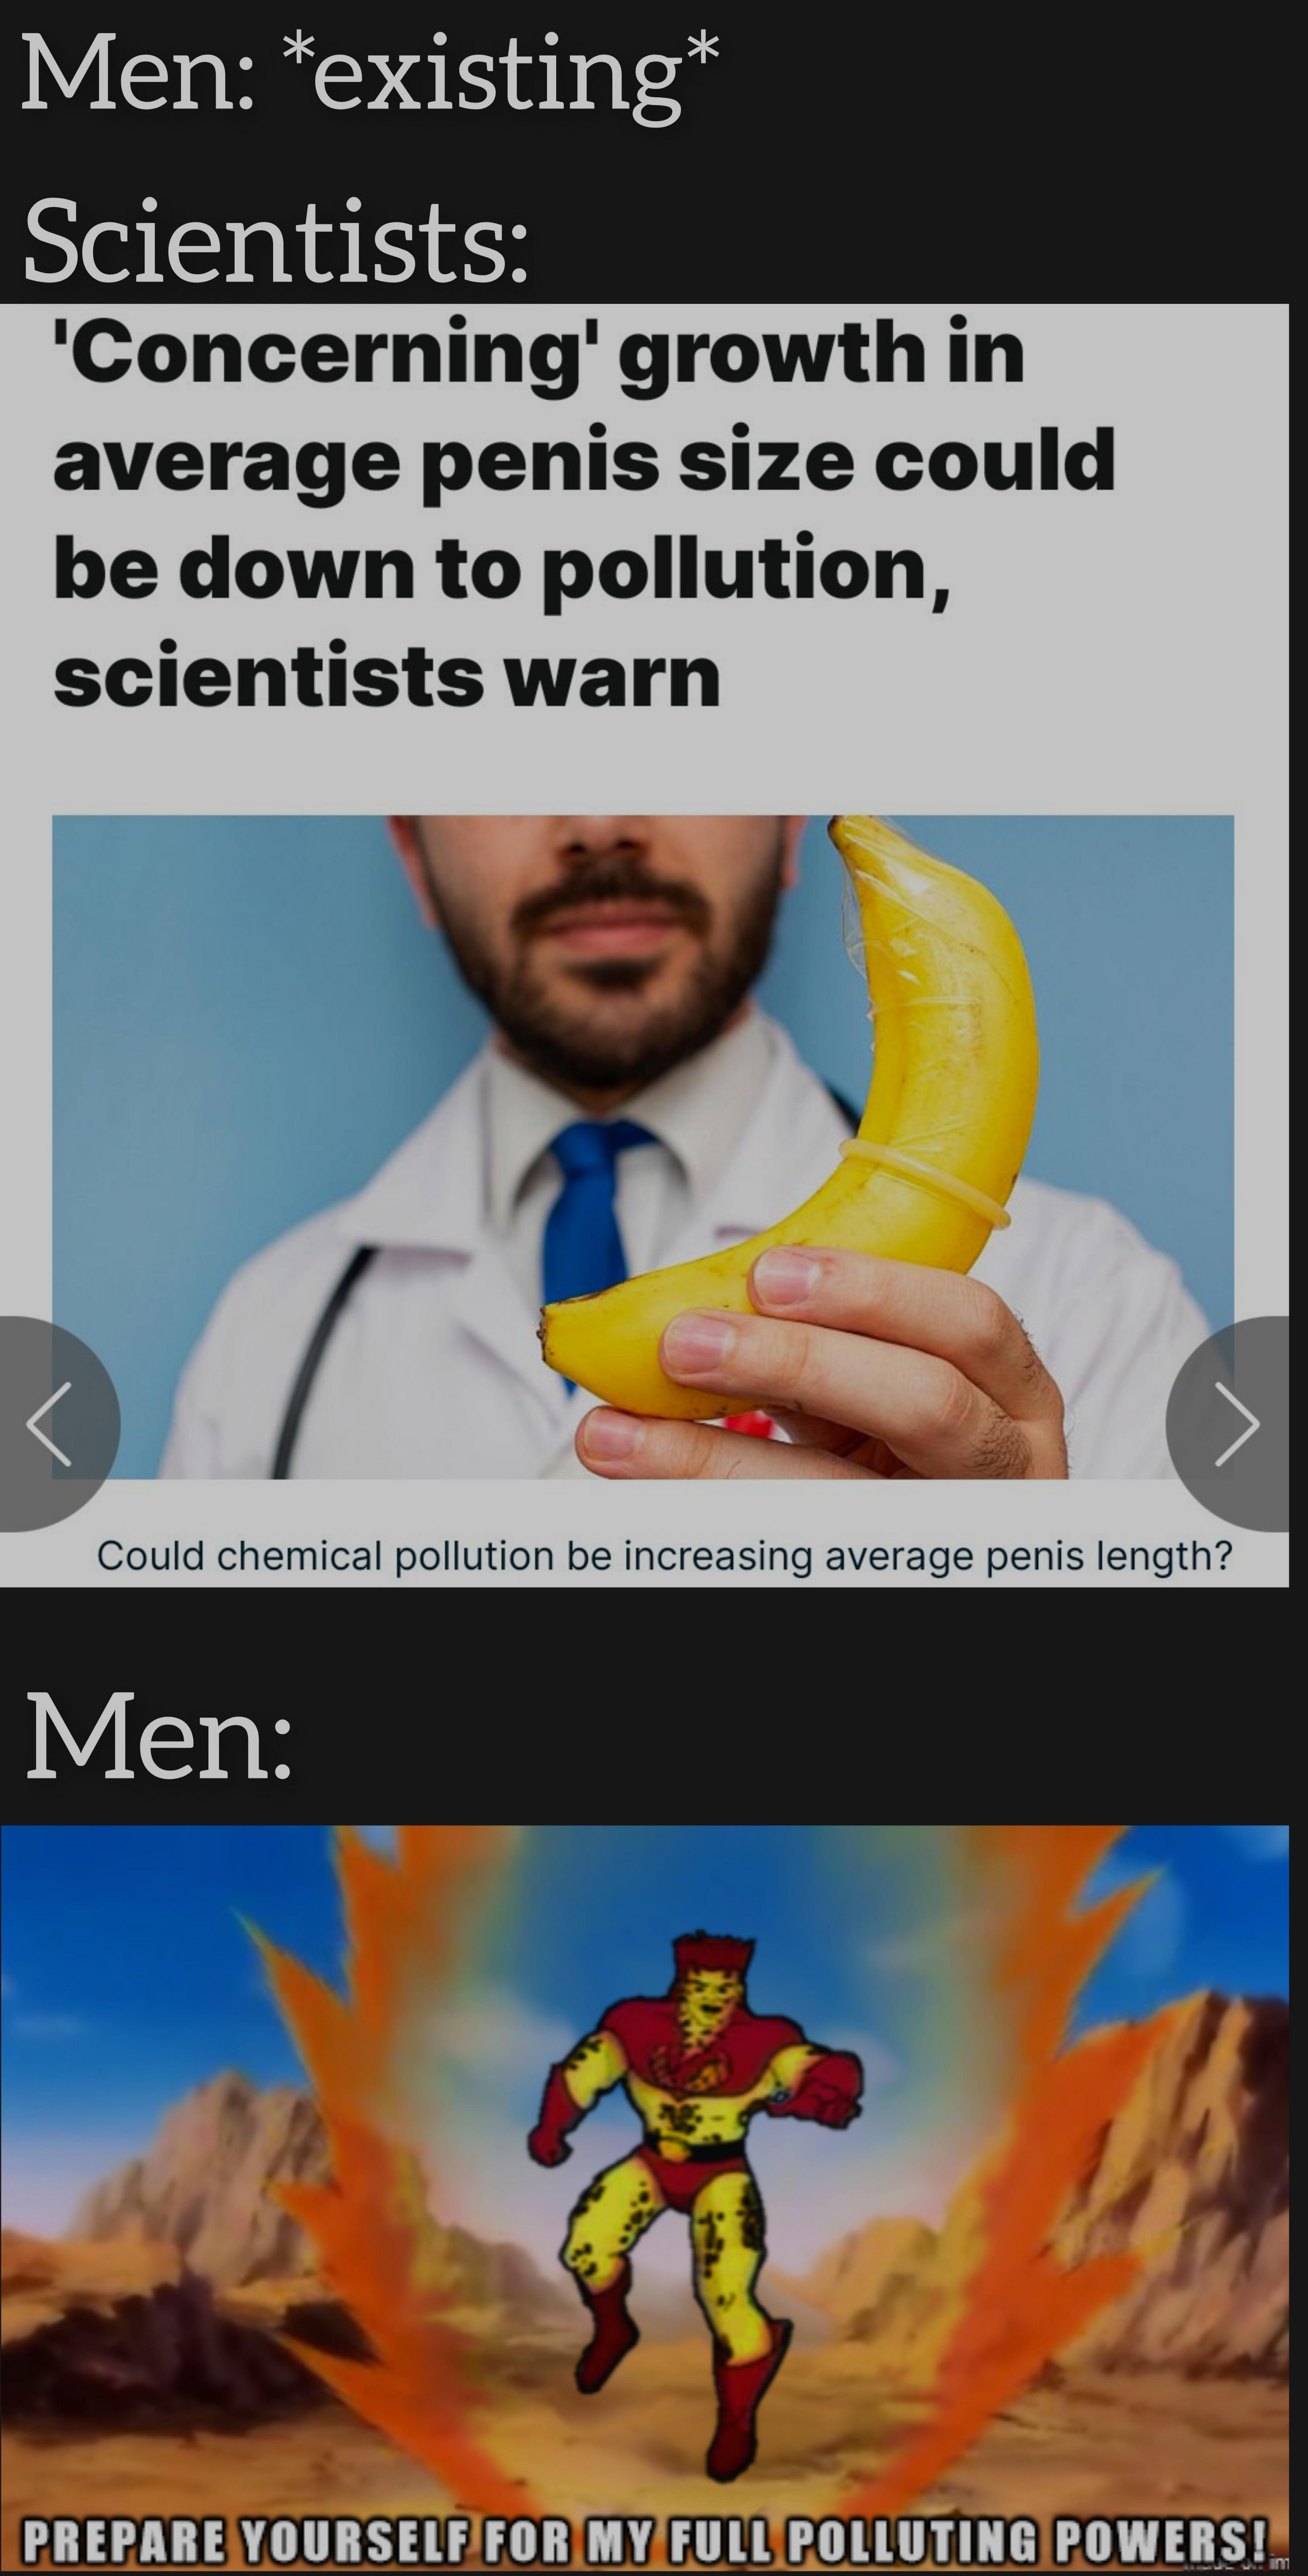 funny memes - poster - Men existing Scientists 'Concerning' growth in average penis size could be down to pollution, scientists warn Could chemical pollution be increasing average penis length? Men Prepare Yourself For My Full Polluting Powers!